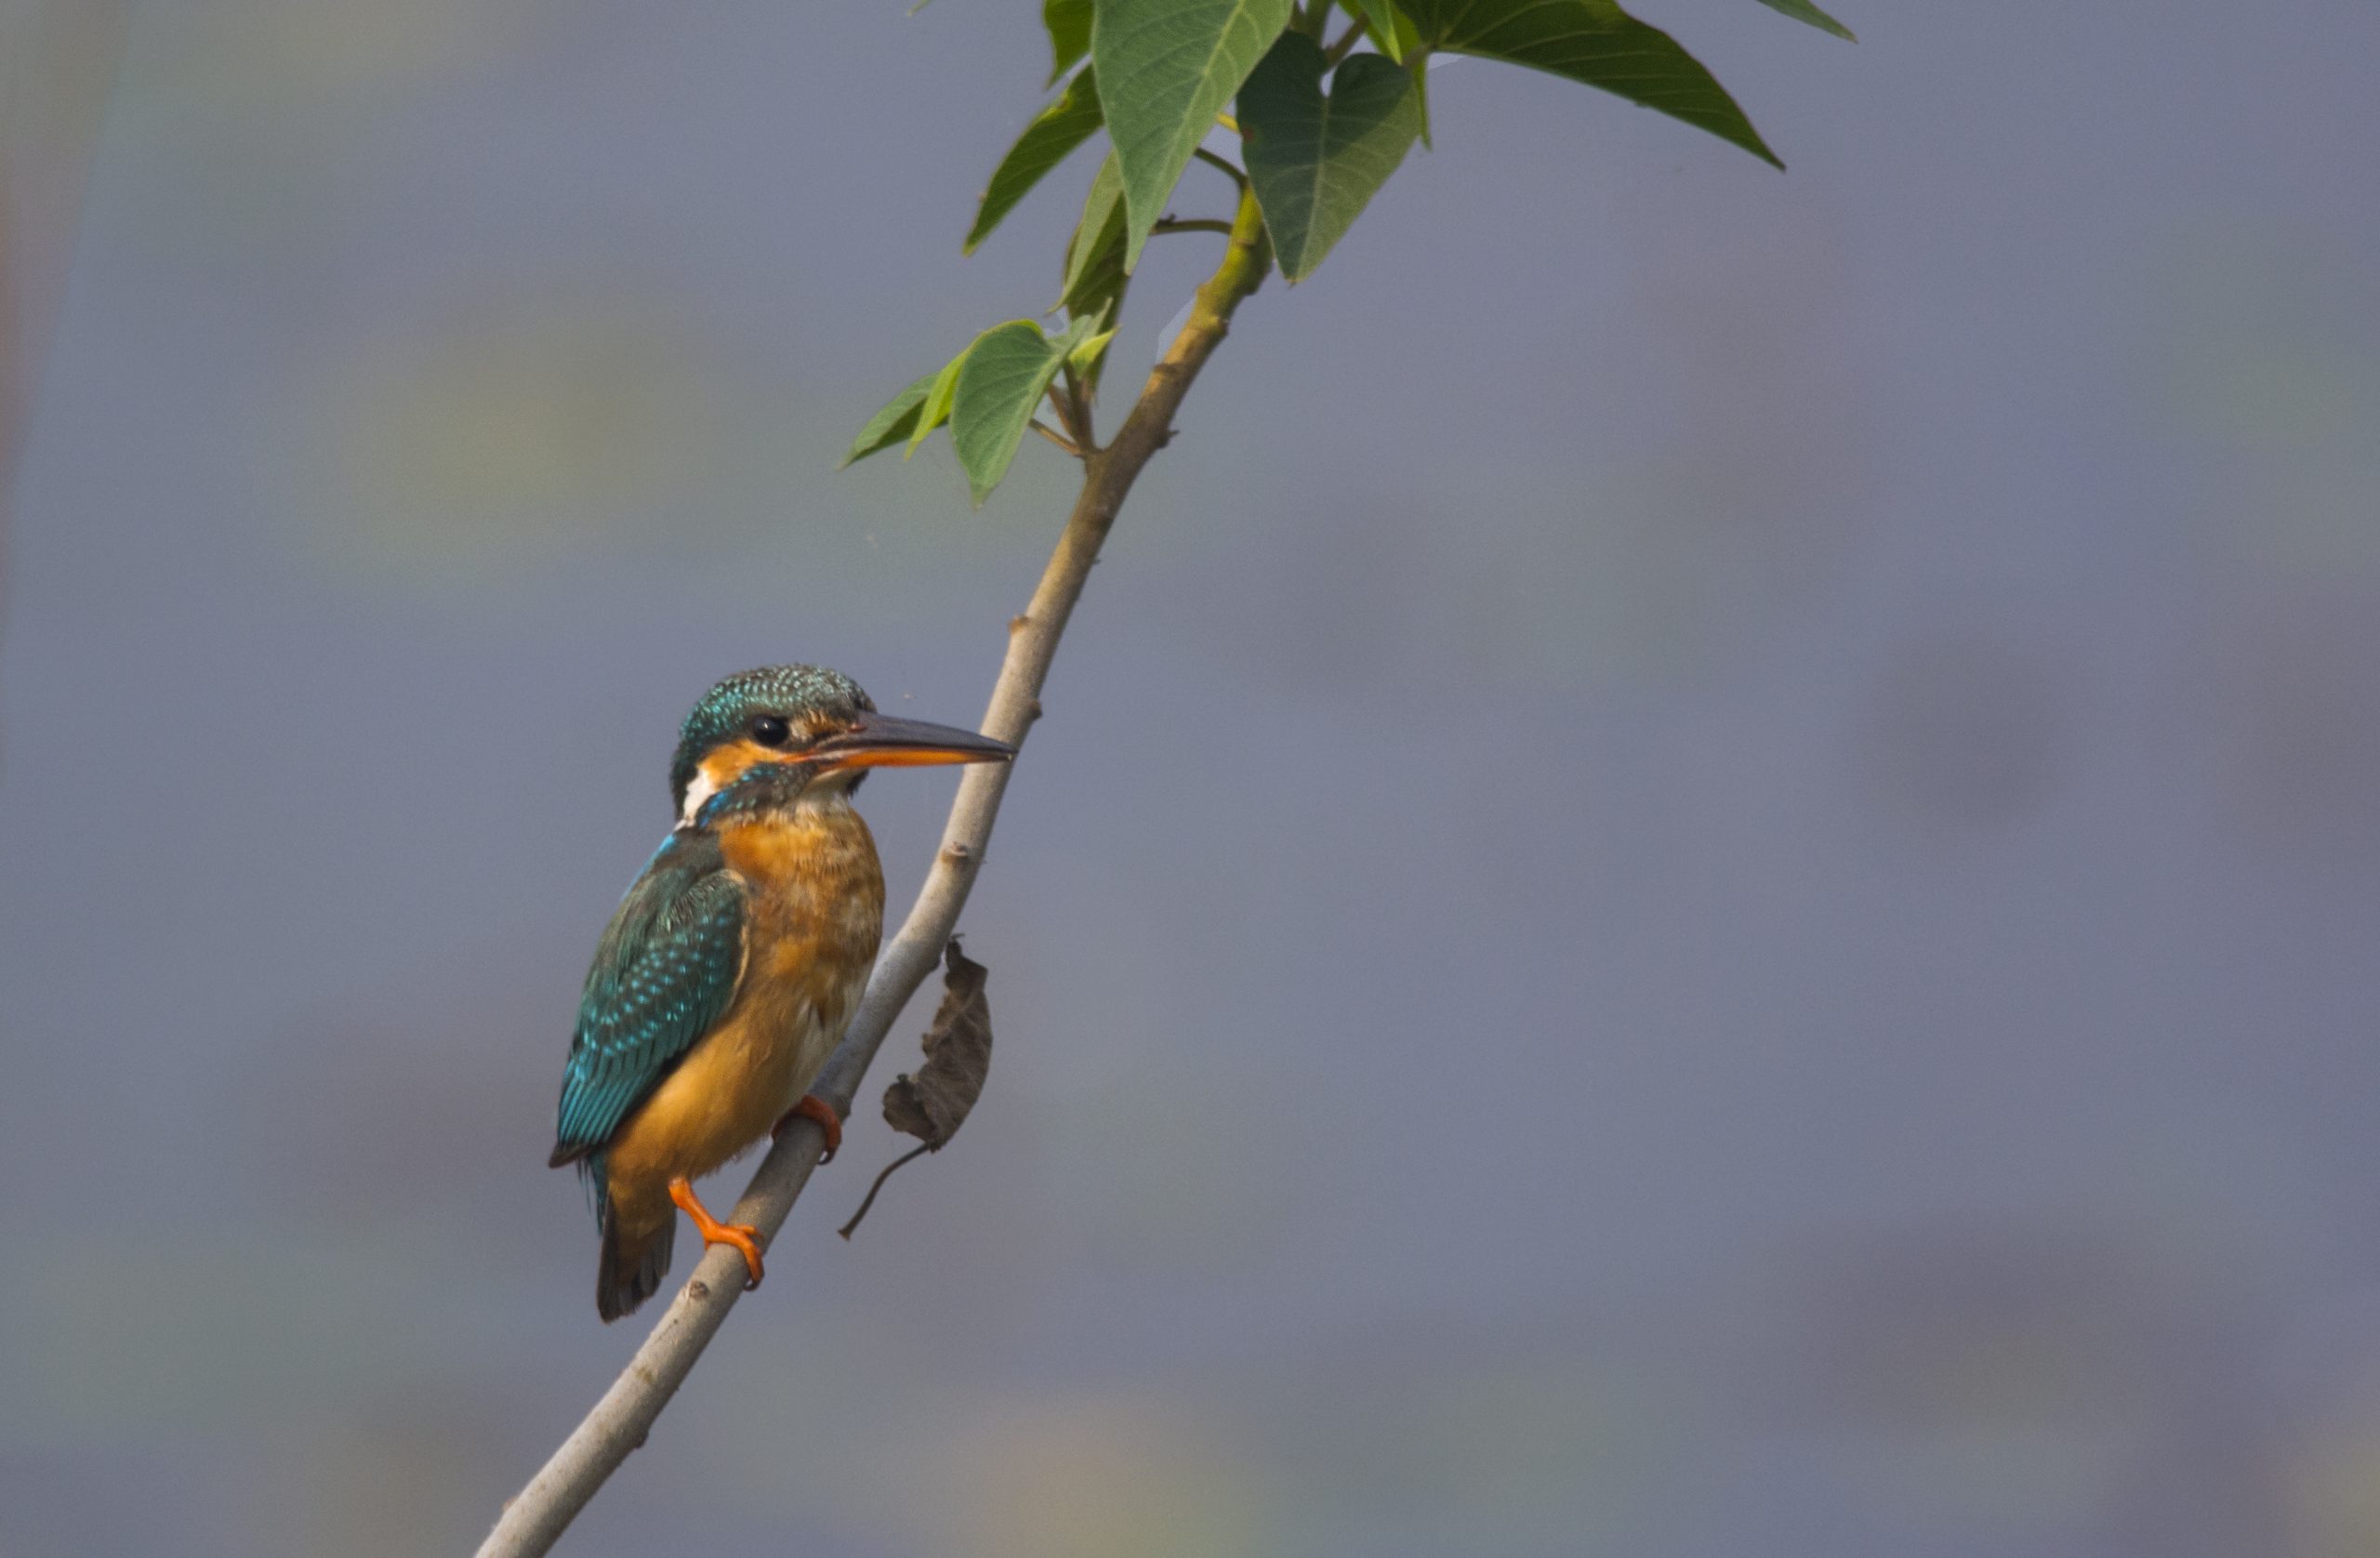 A kingfisher on a branch